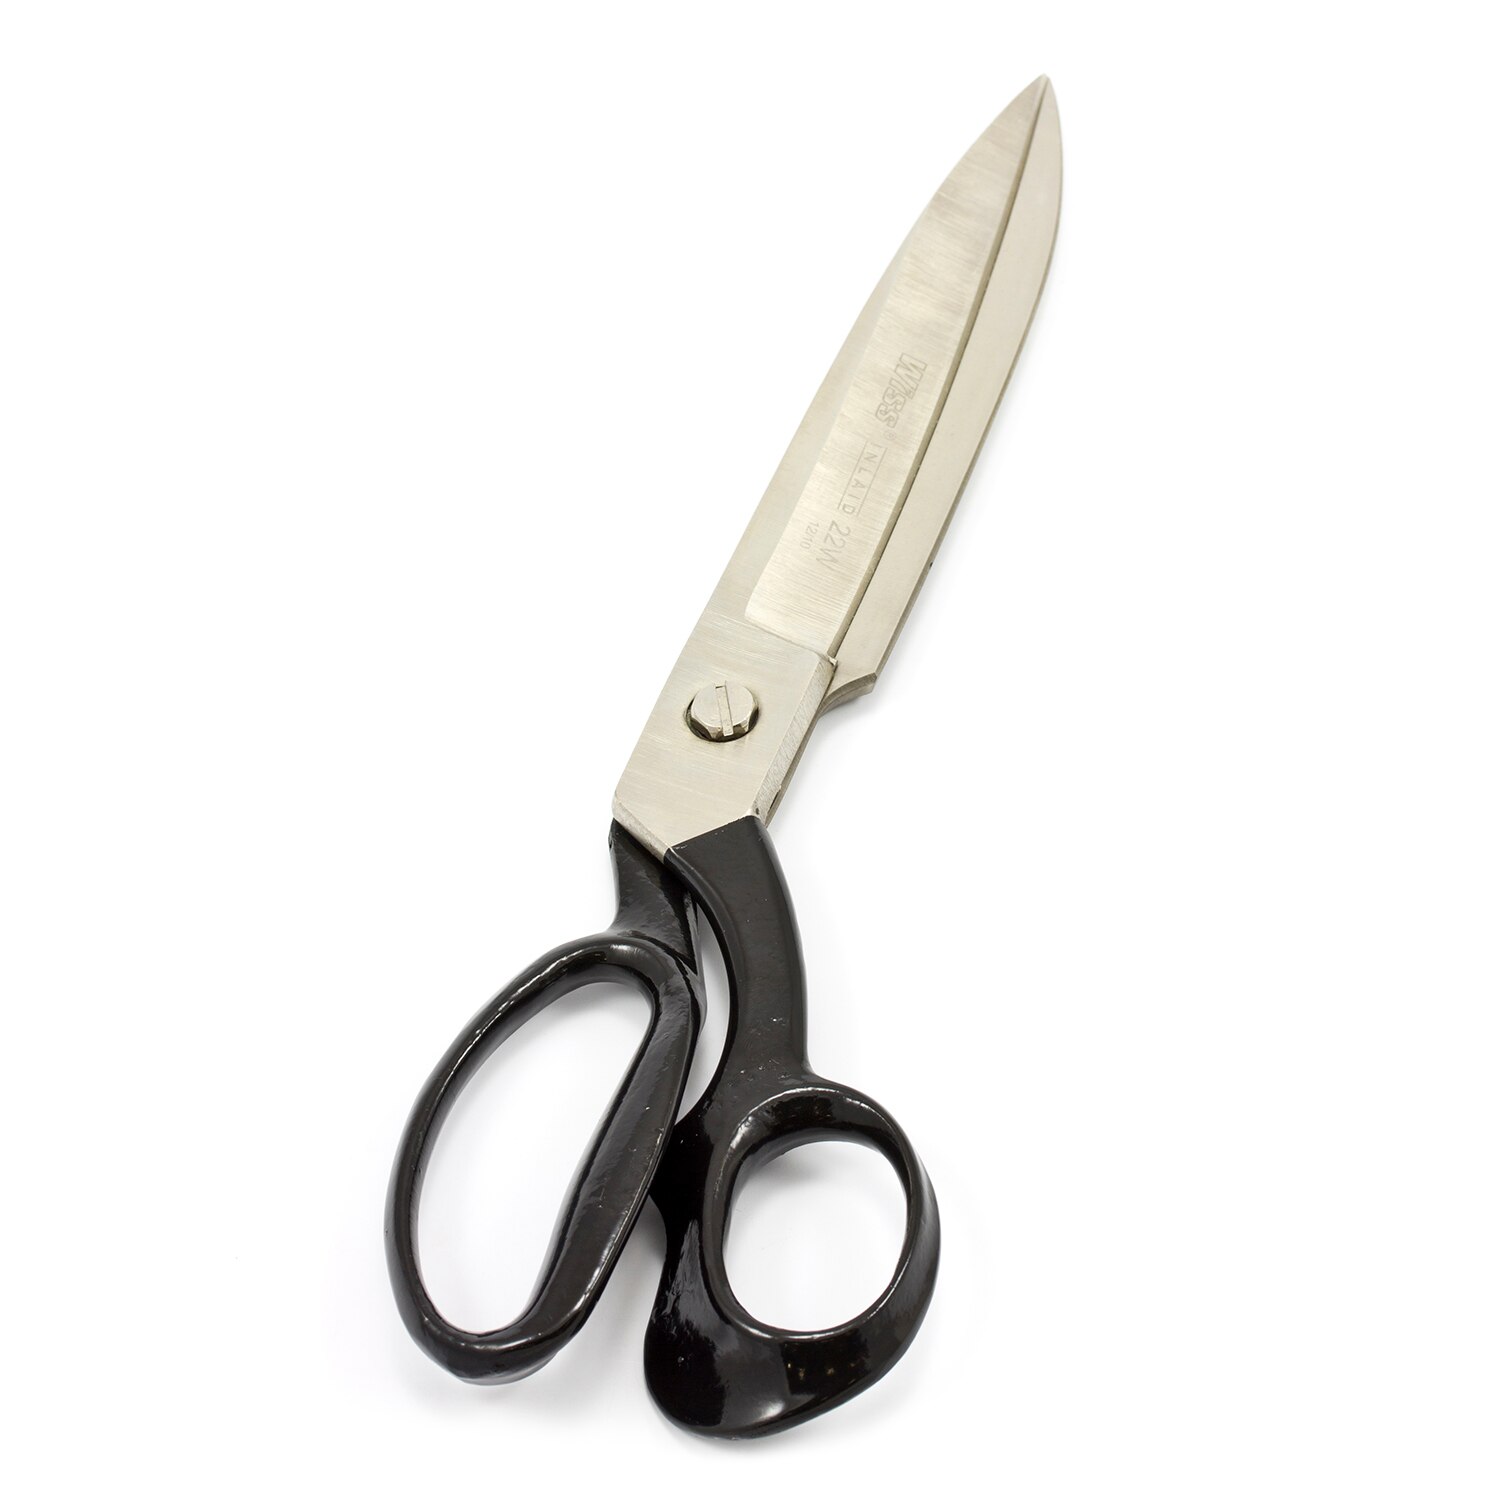 Buy Wiss® Heavy Duty Upholstery, Carpet and Fabric Shears #20W 10